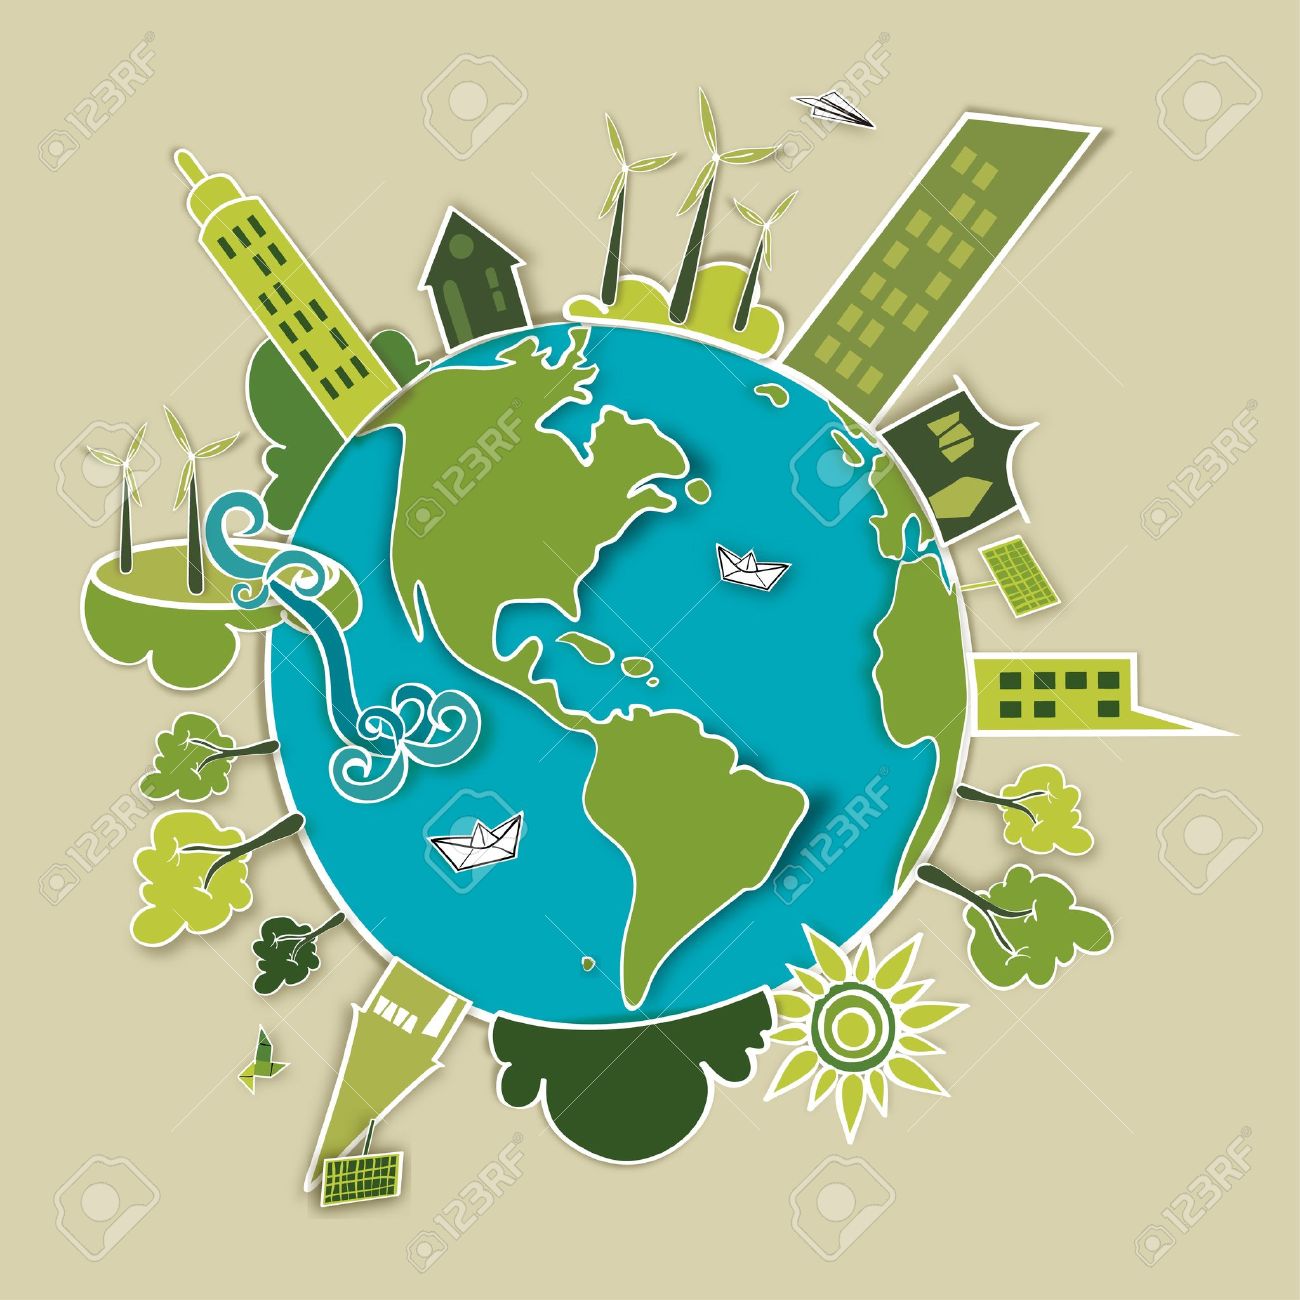 Go Green World Industry Sustainable Development With Environmental